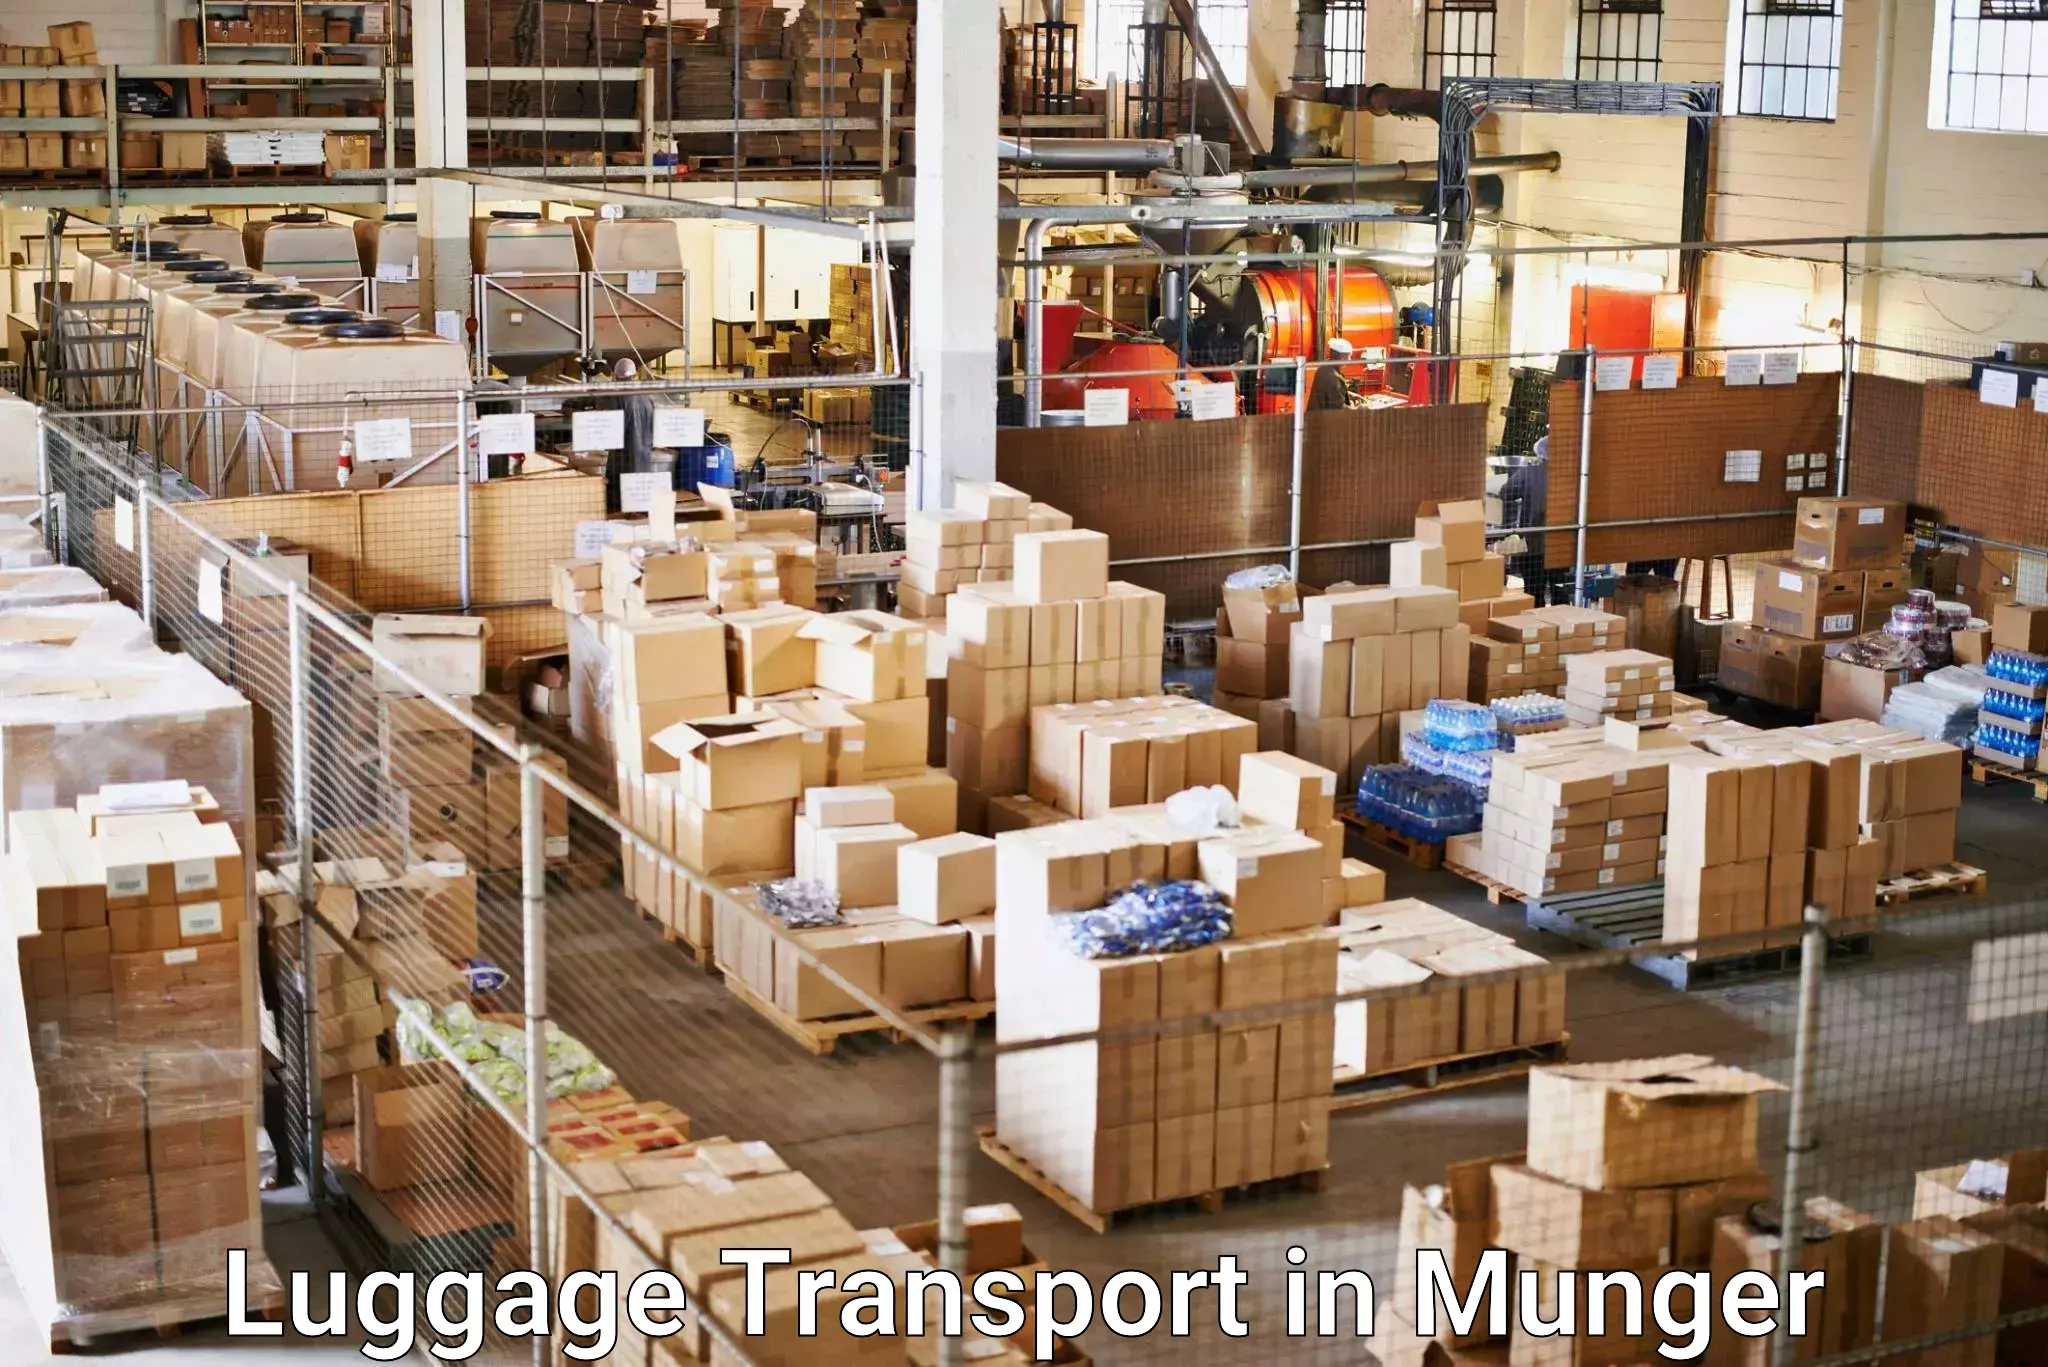 Luggage shipping estimate in Munger